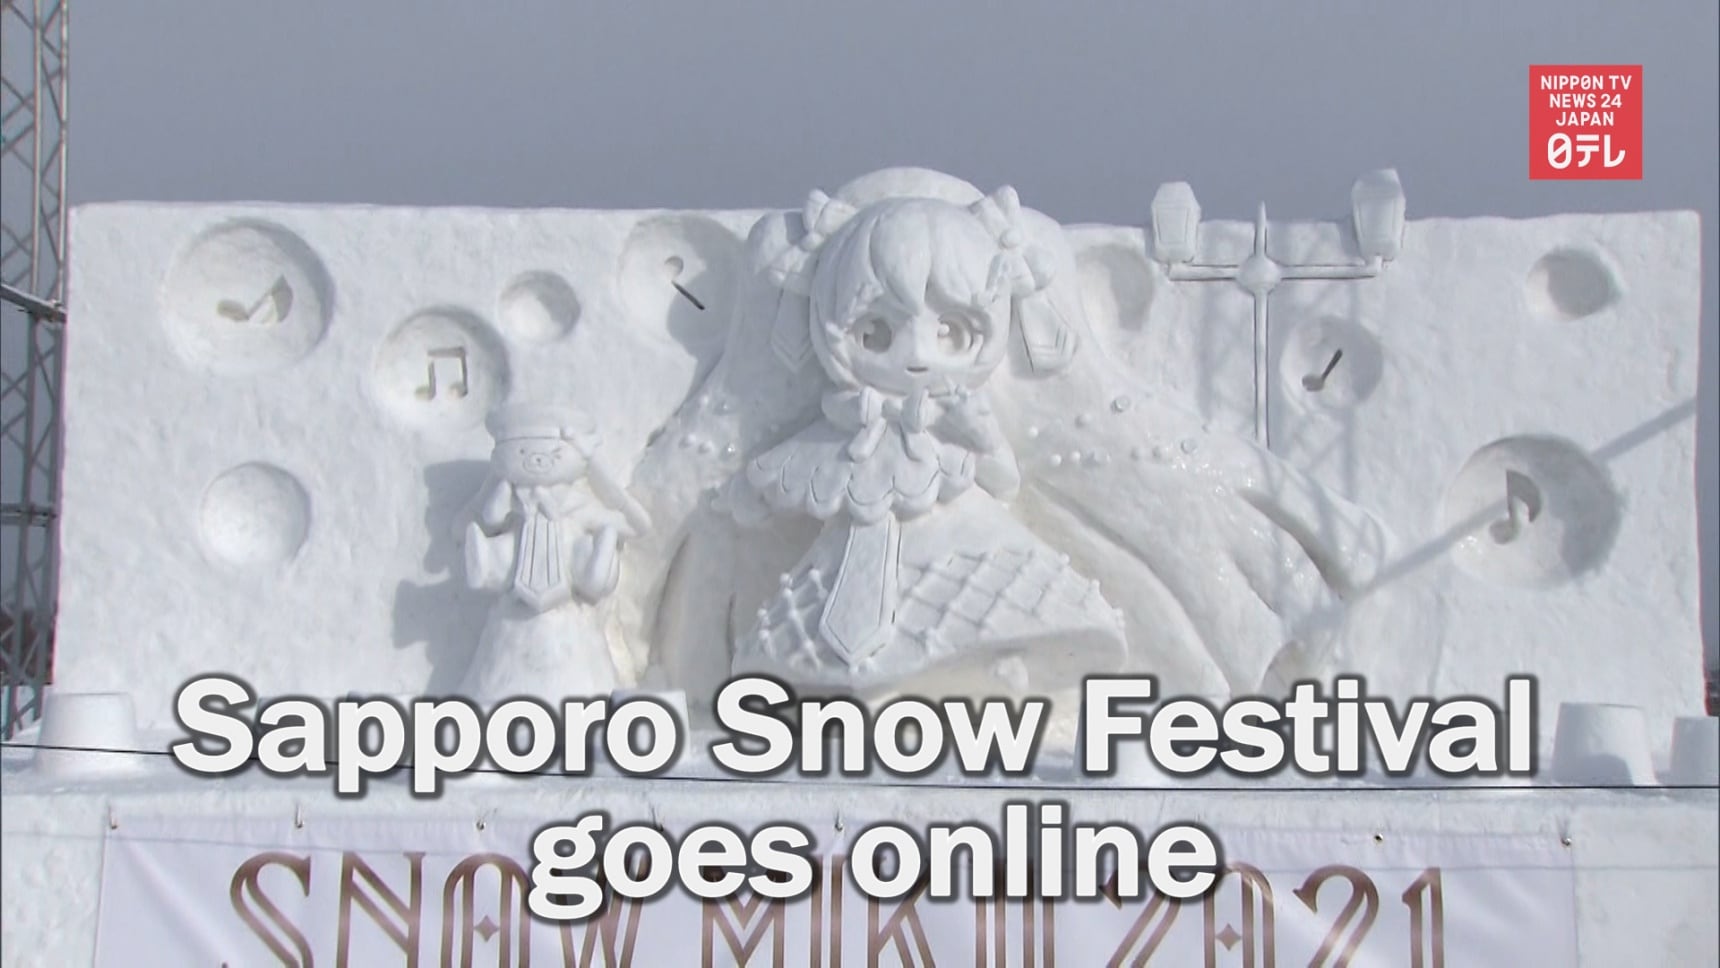 Sapporo's Snow Festival Going Online This Year